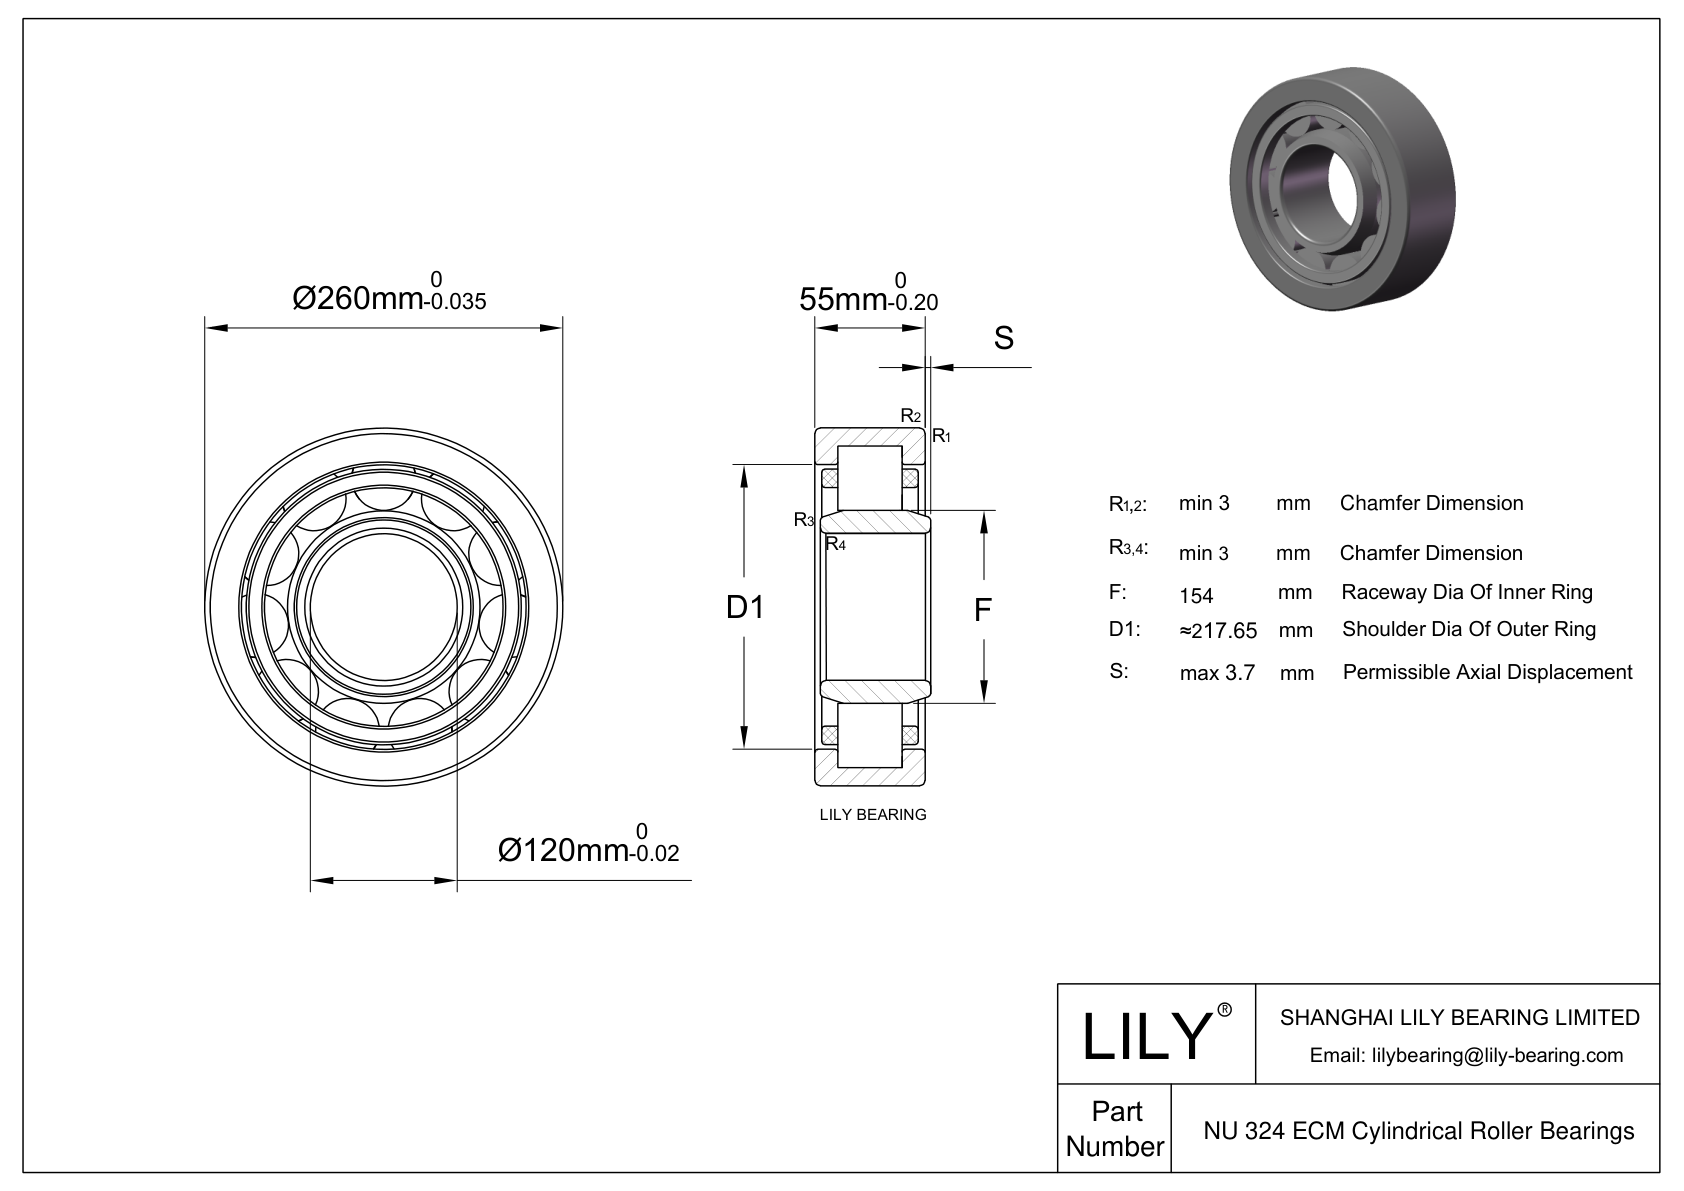 NU 324 ECM/C3VL0241 Ceramic Coated Cylindrical Roller Bearings cad drawing